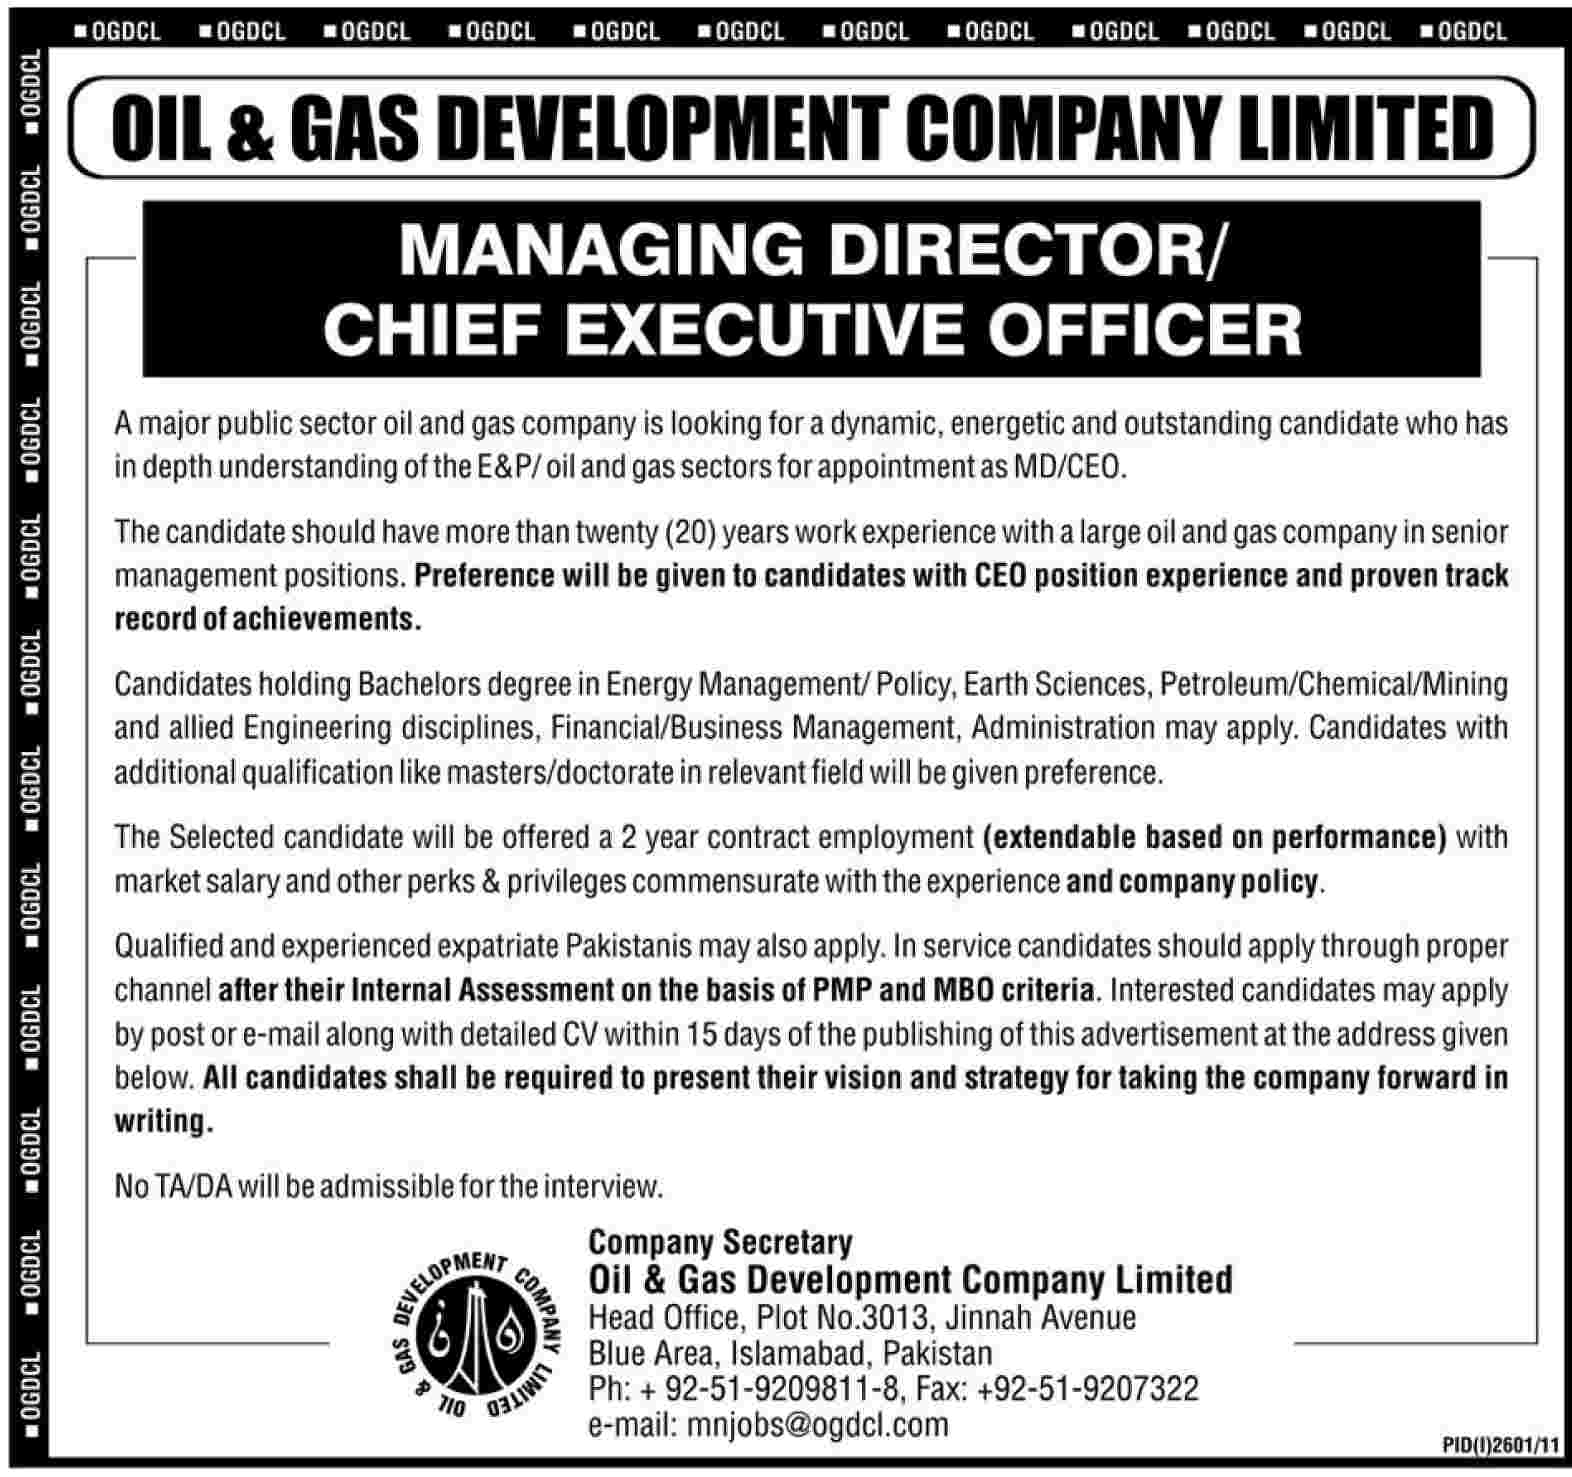 Oil and Gas Development Company Limited Required the Service of Managing Director/Chief Executive Officer